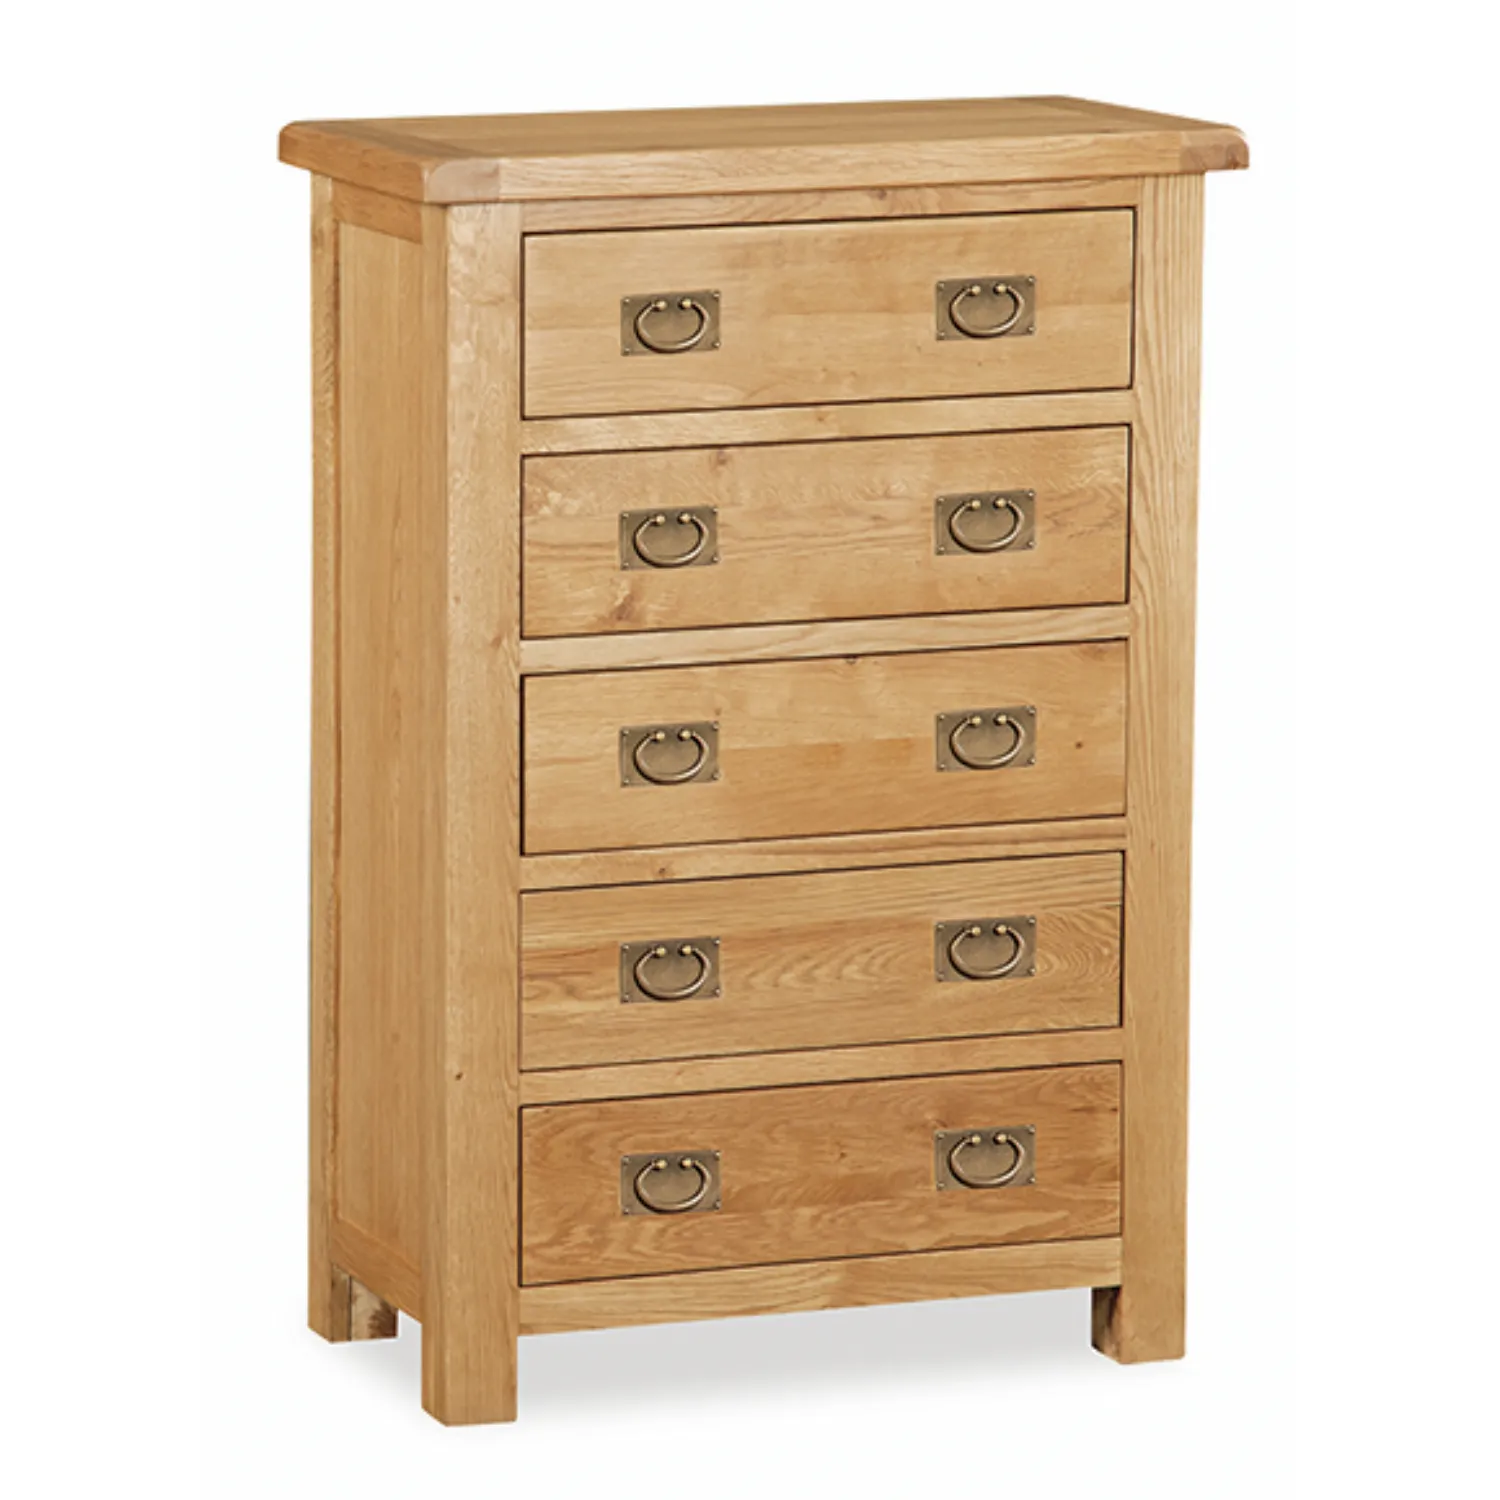 Rustic Solid Oak 5 Drawer Chest